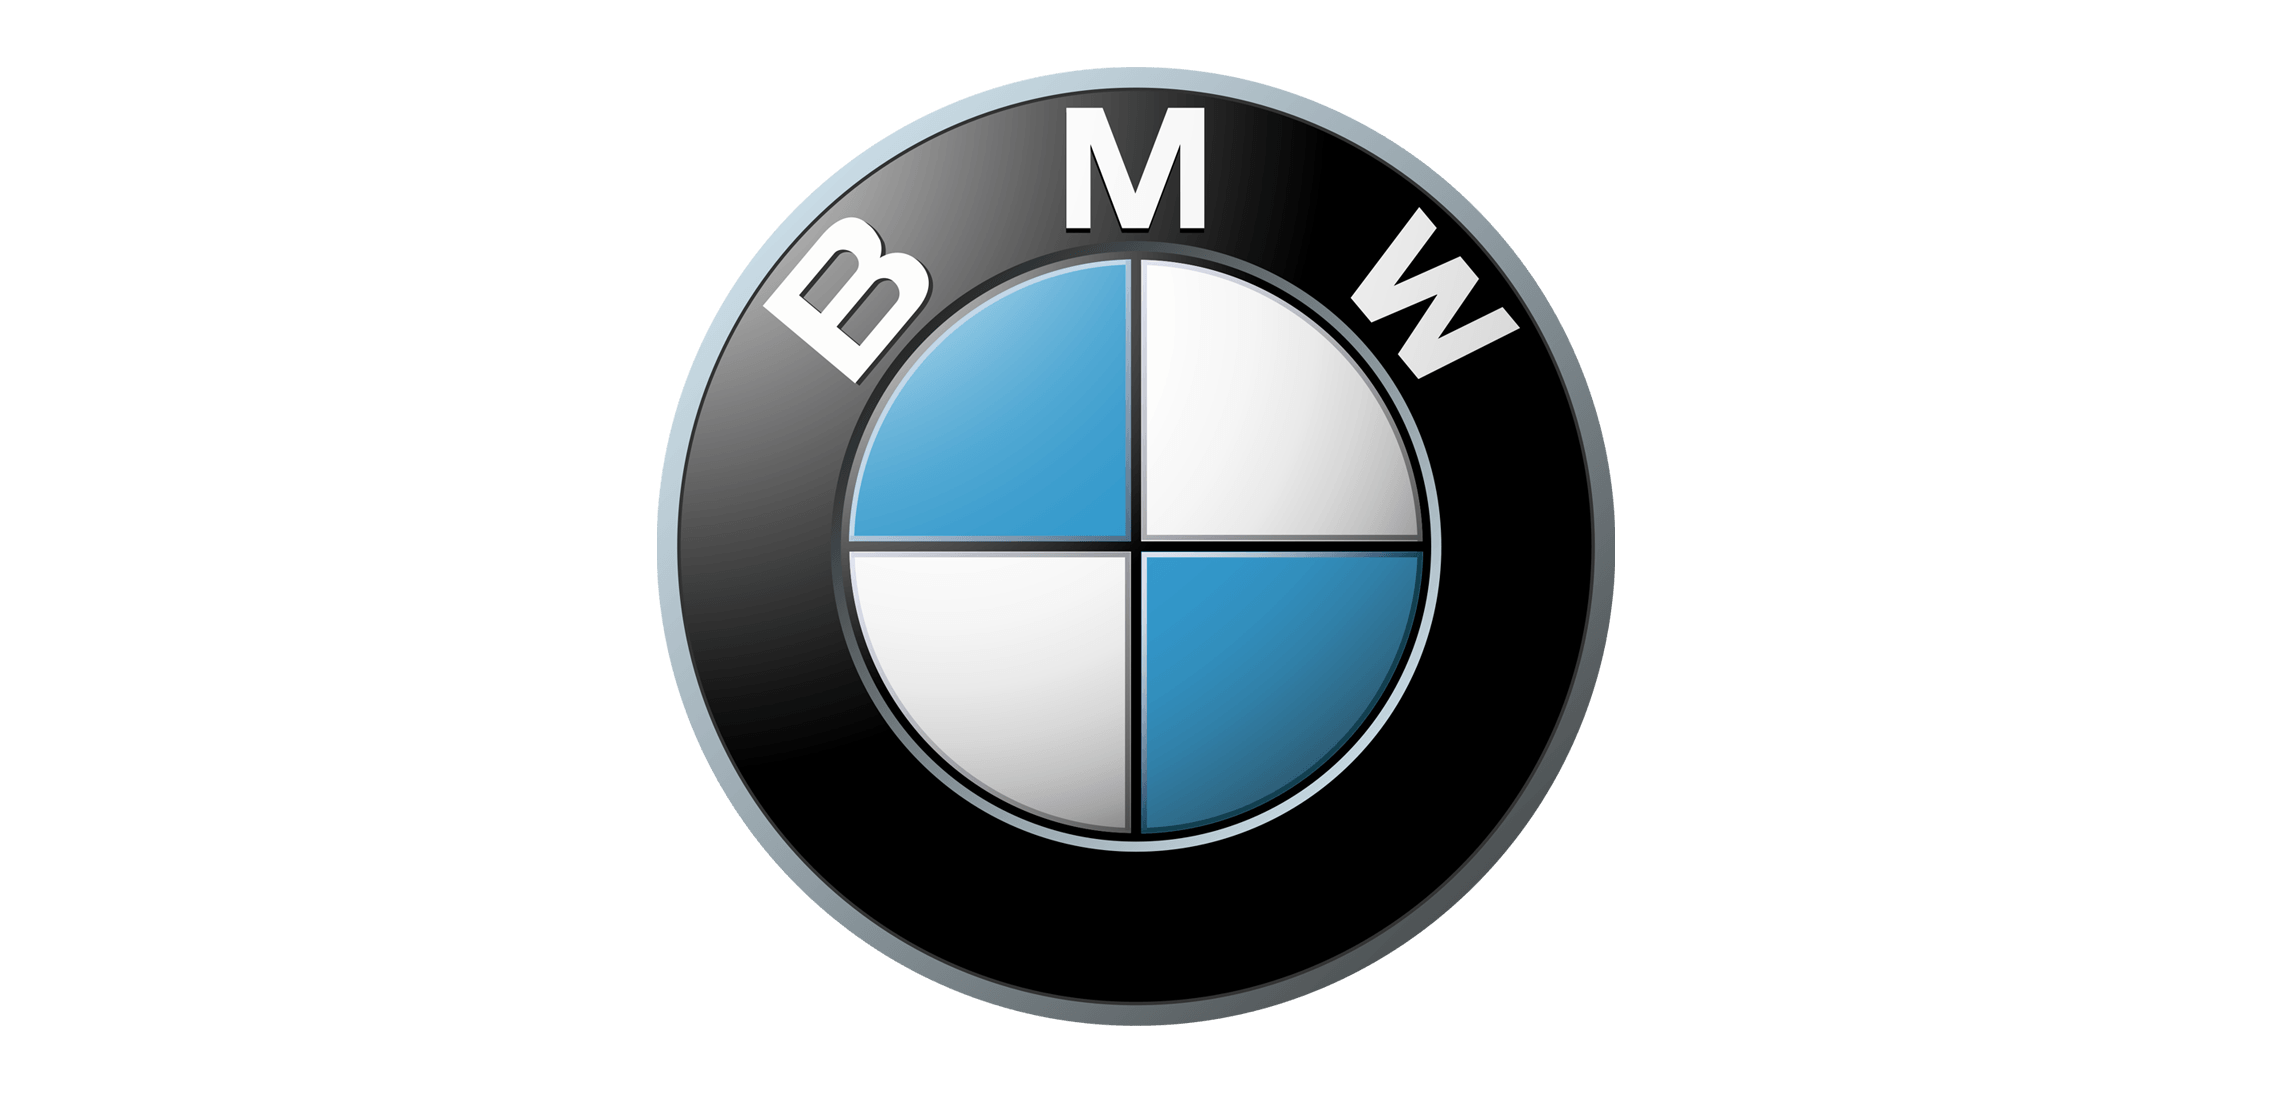 Vehicle Manufacturer Shield Logo - BMW Logo Meaning and History. Symbol BMW | World Cars Brands